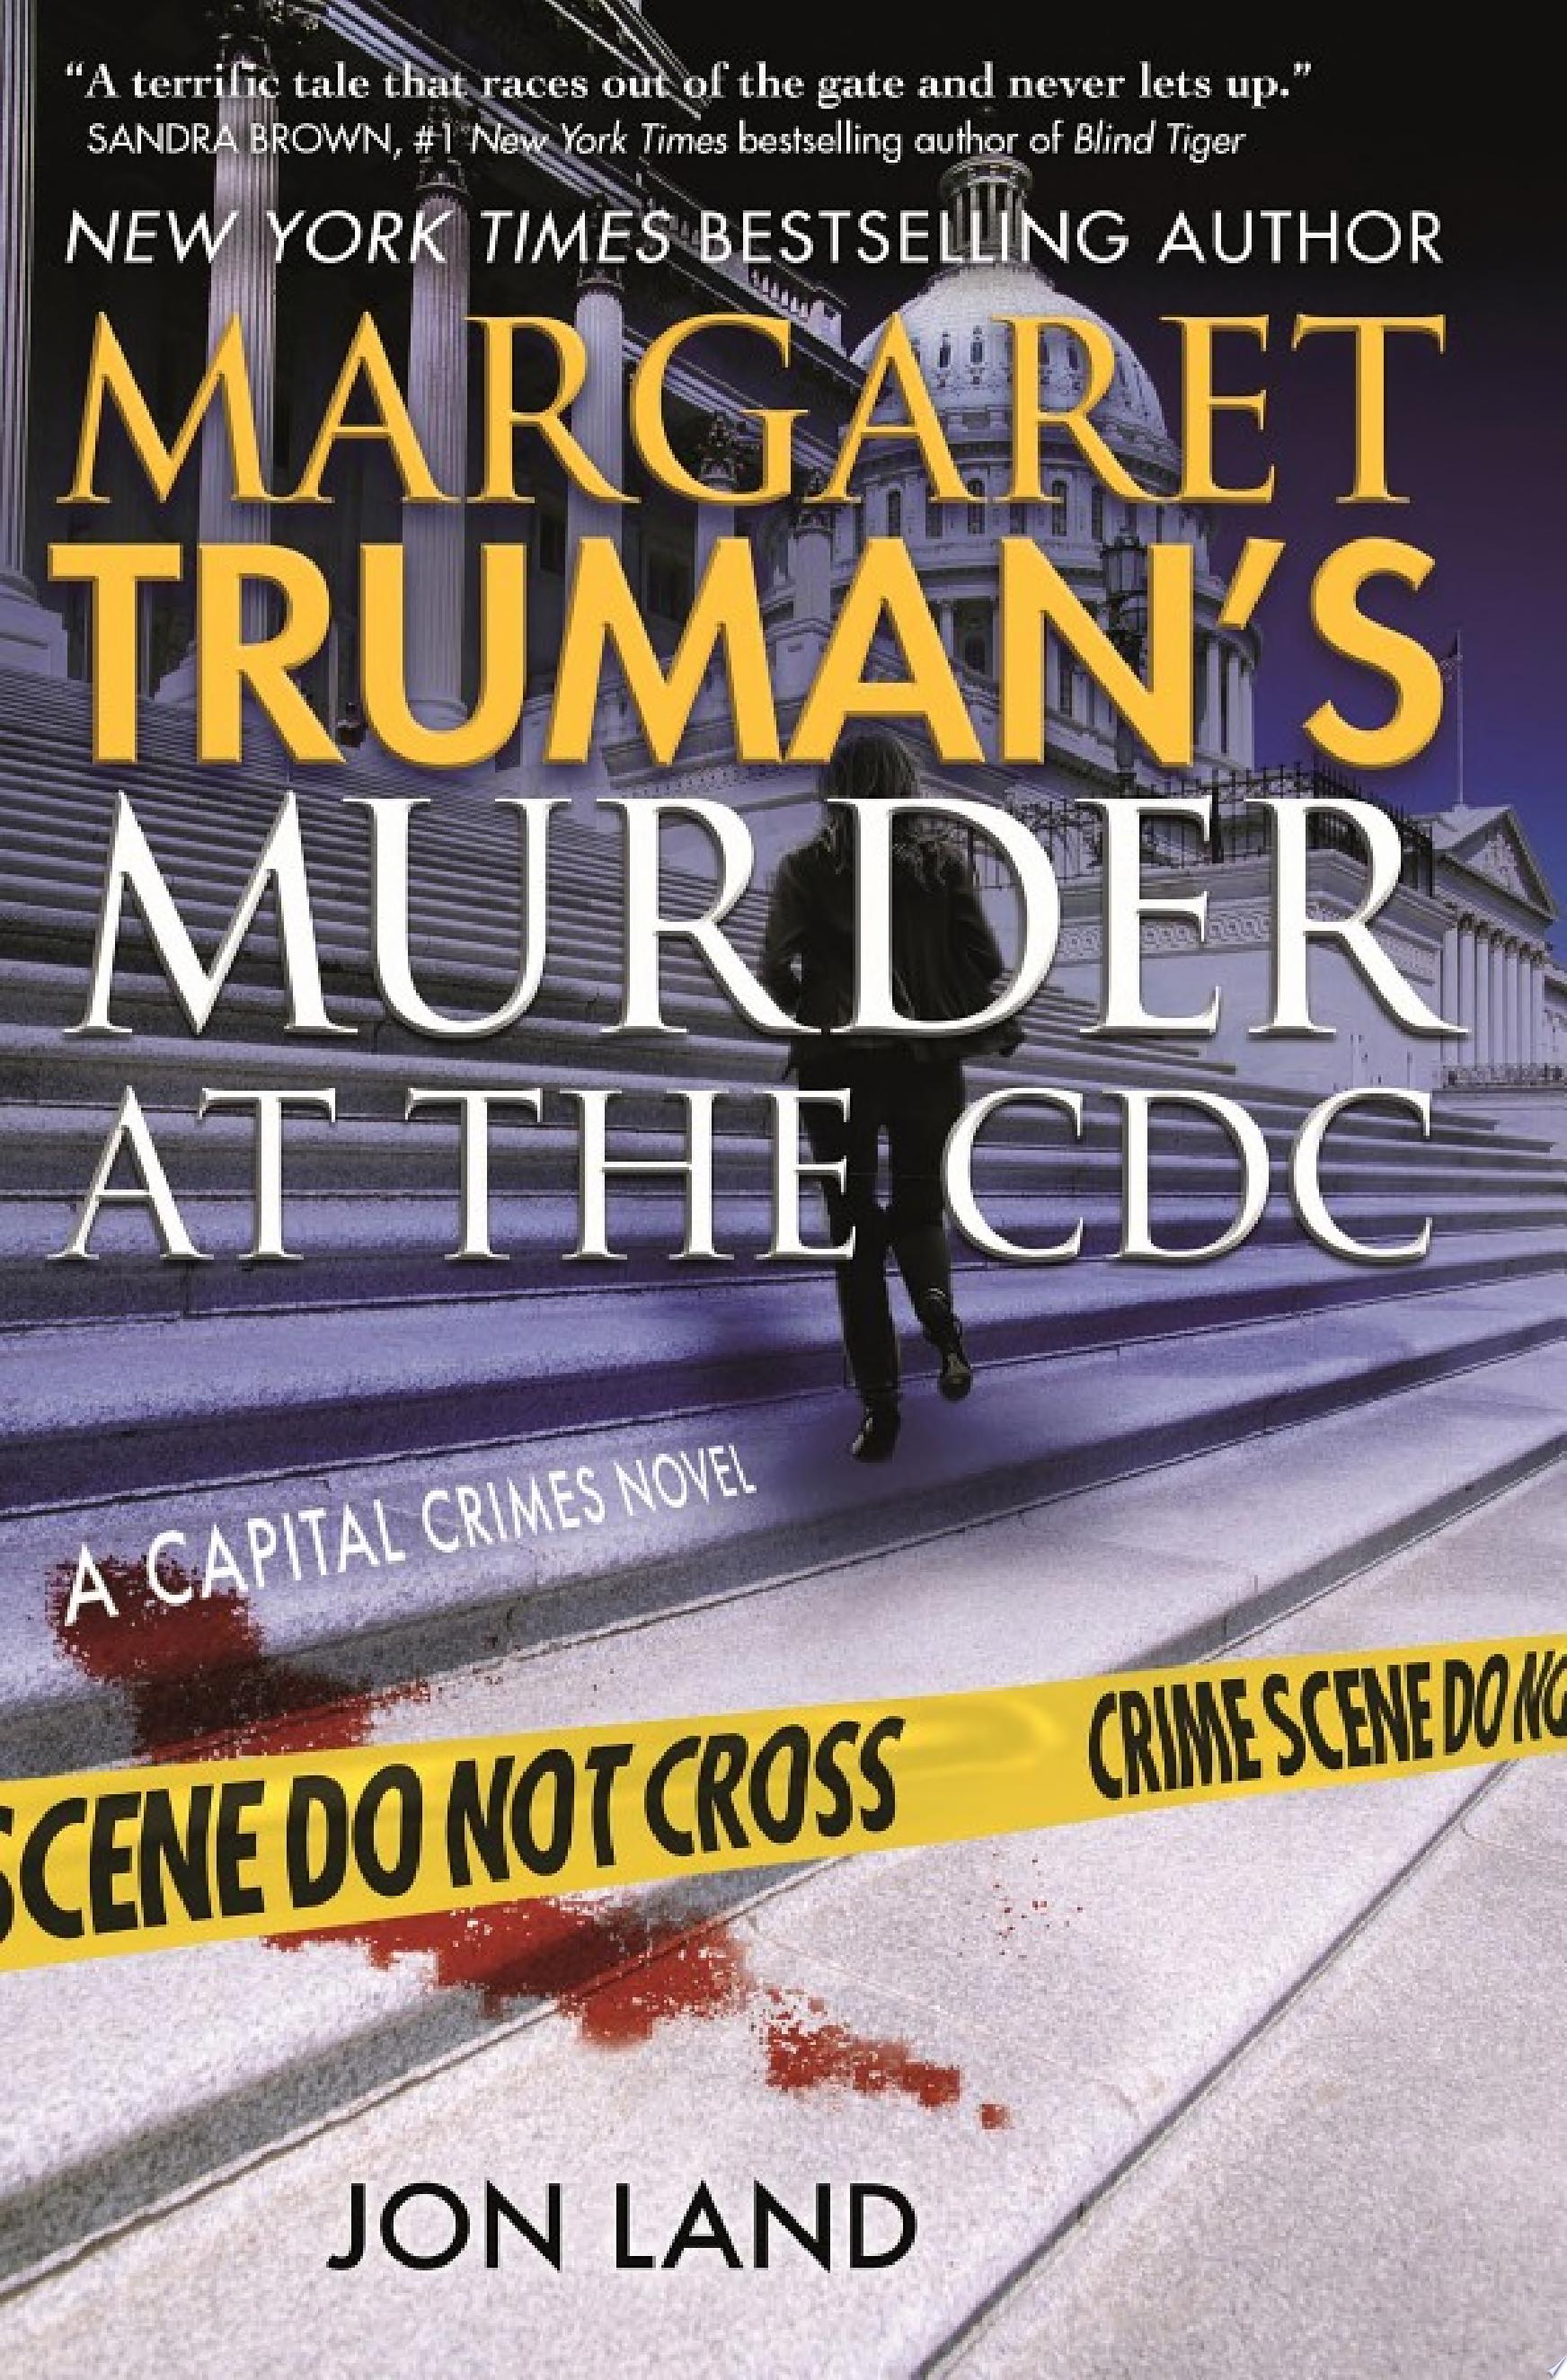 Image for "Margaret Truman's Murder at the CDC"